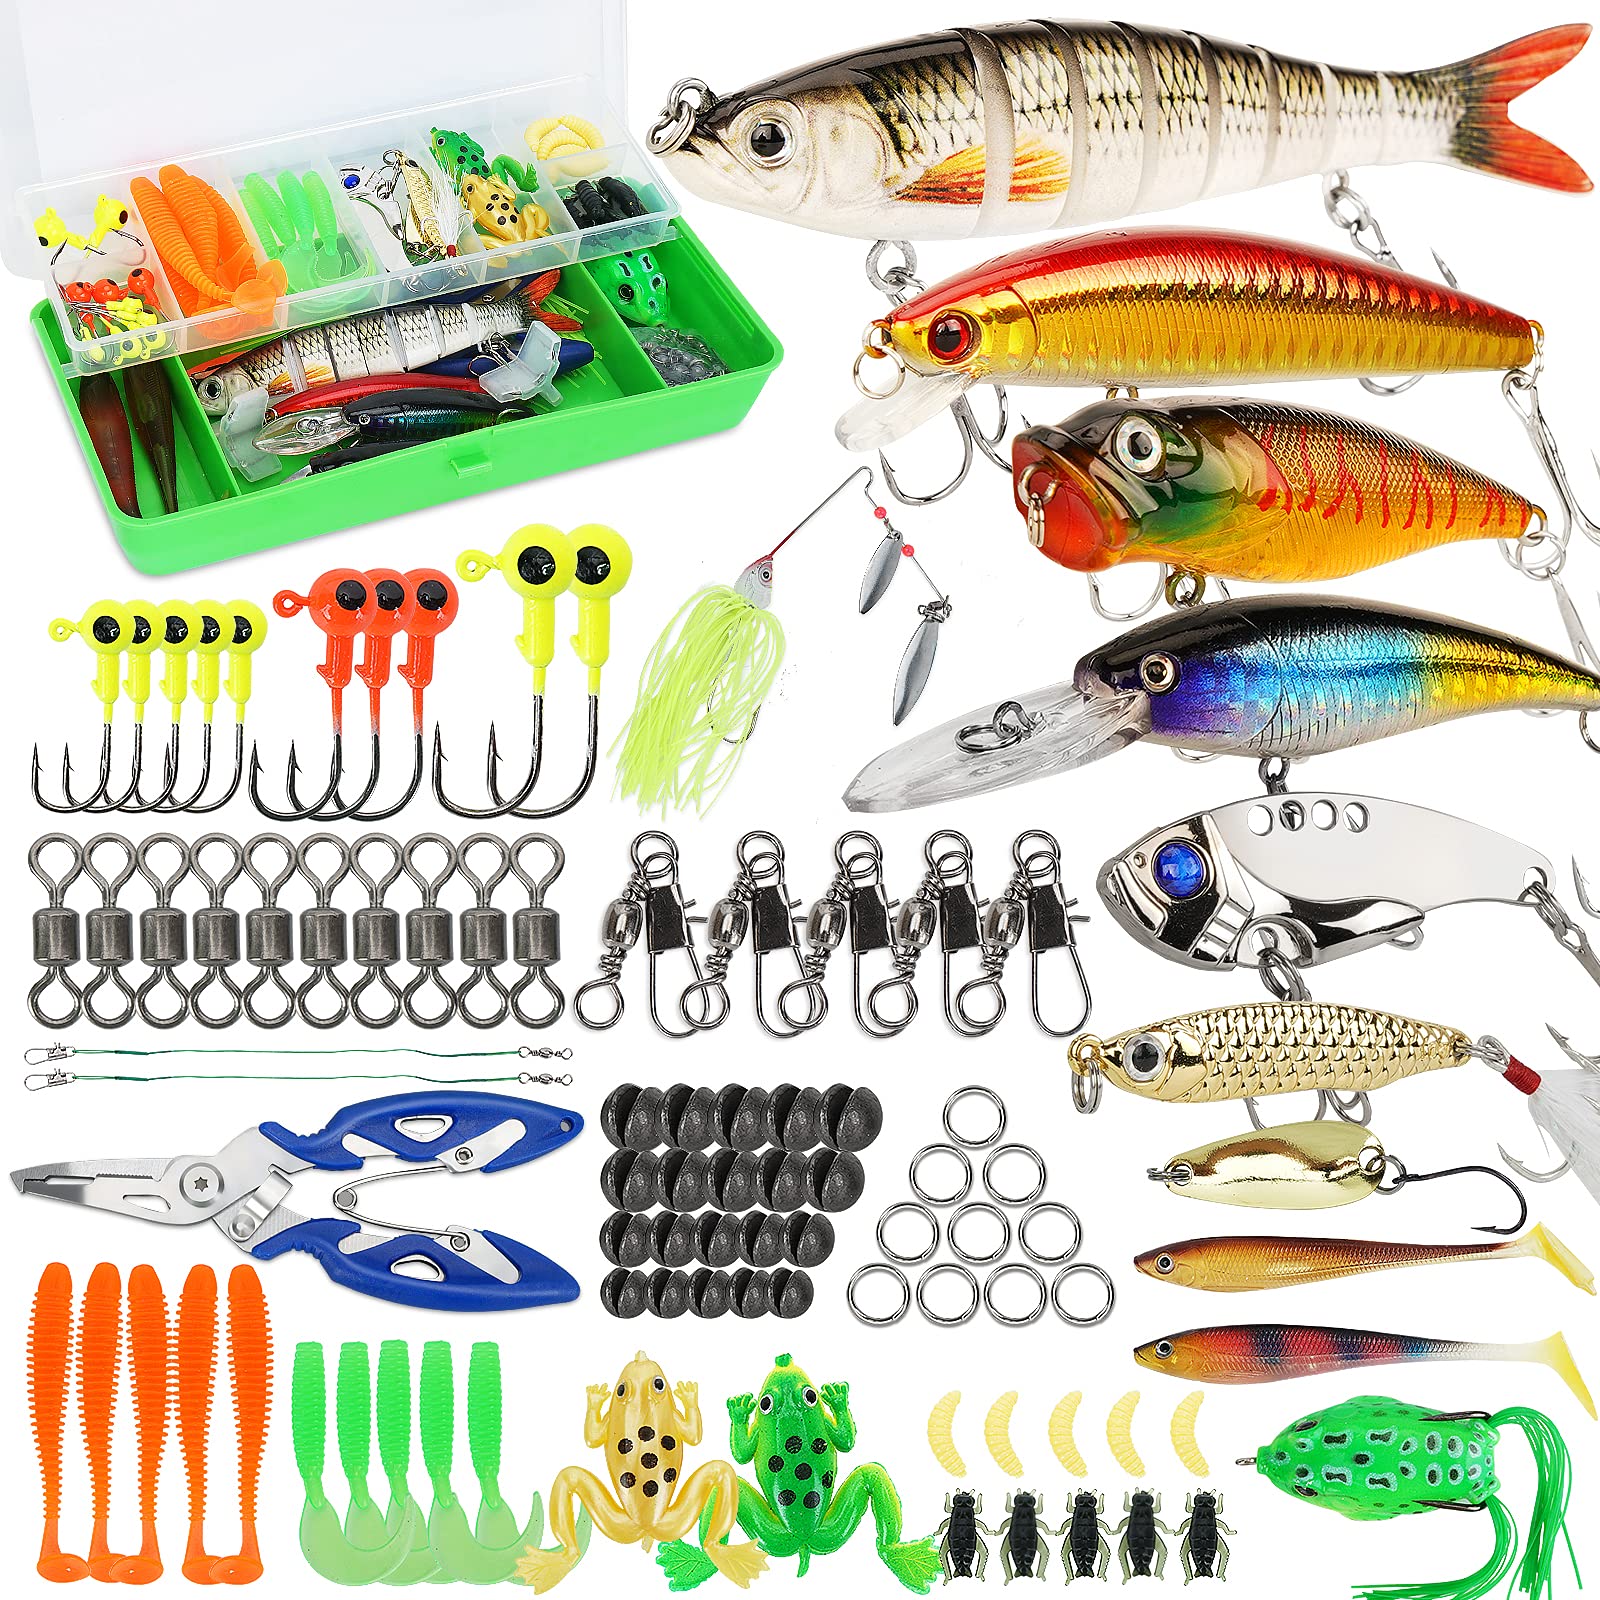 Where can I find the best place for fishing accessories for sale